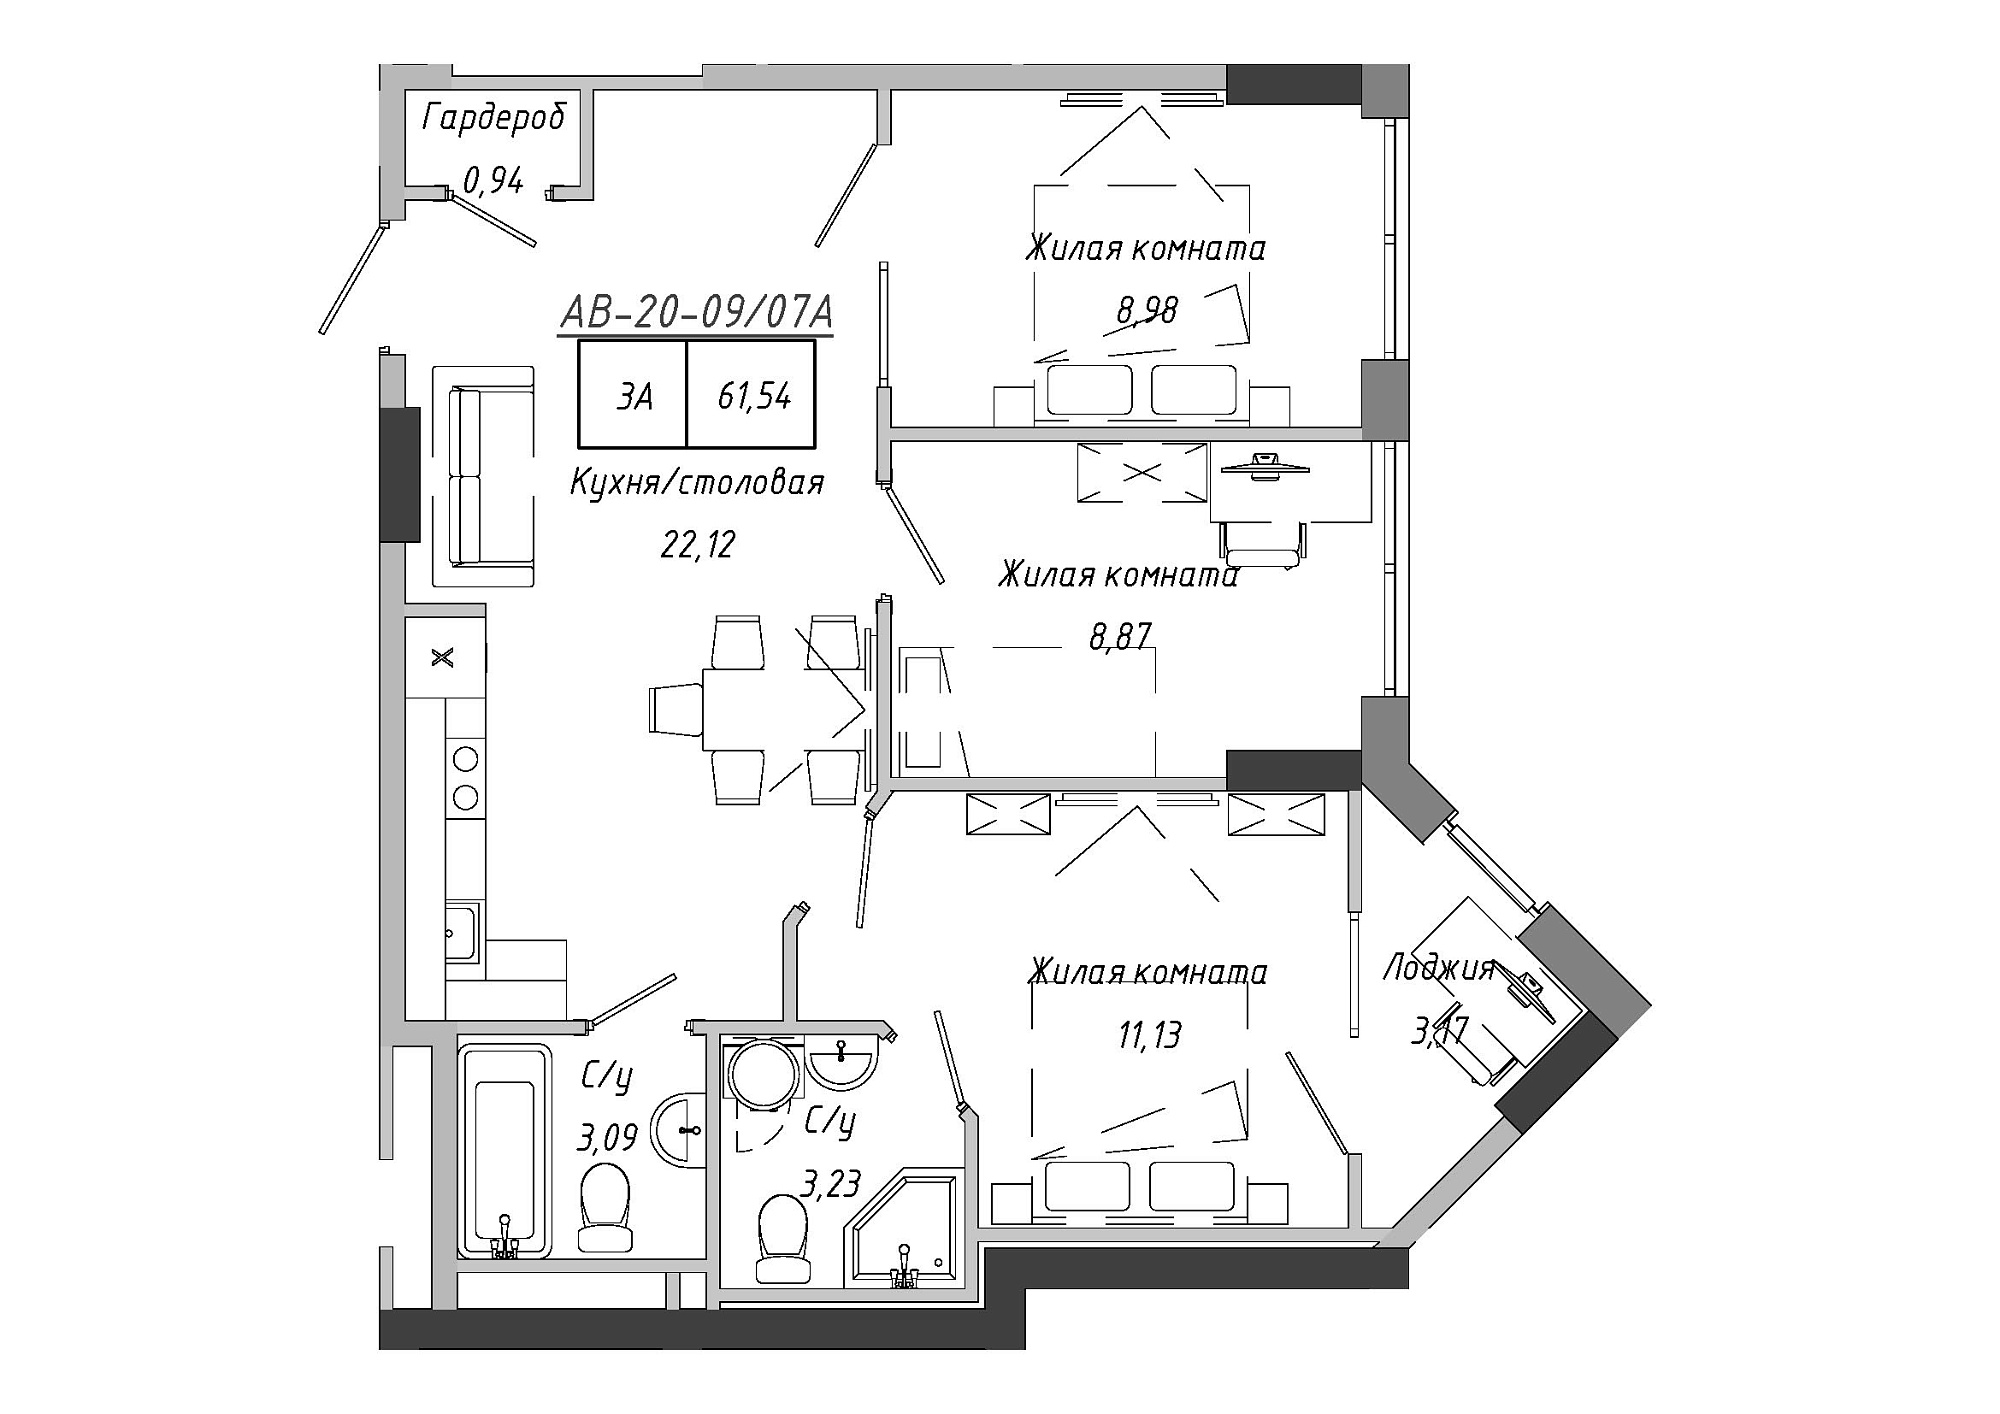 Planning 3-rm flats area 62.67m2, AB-20-09/0007а.